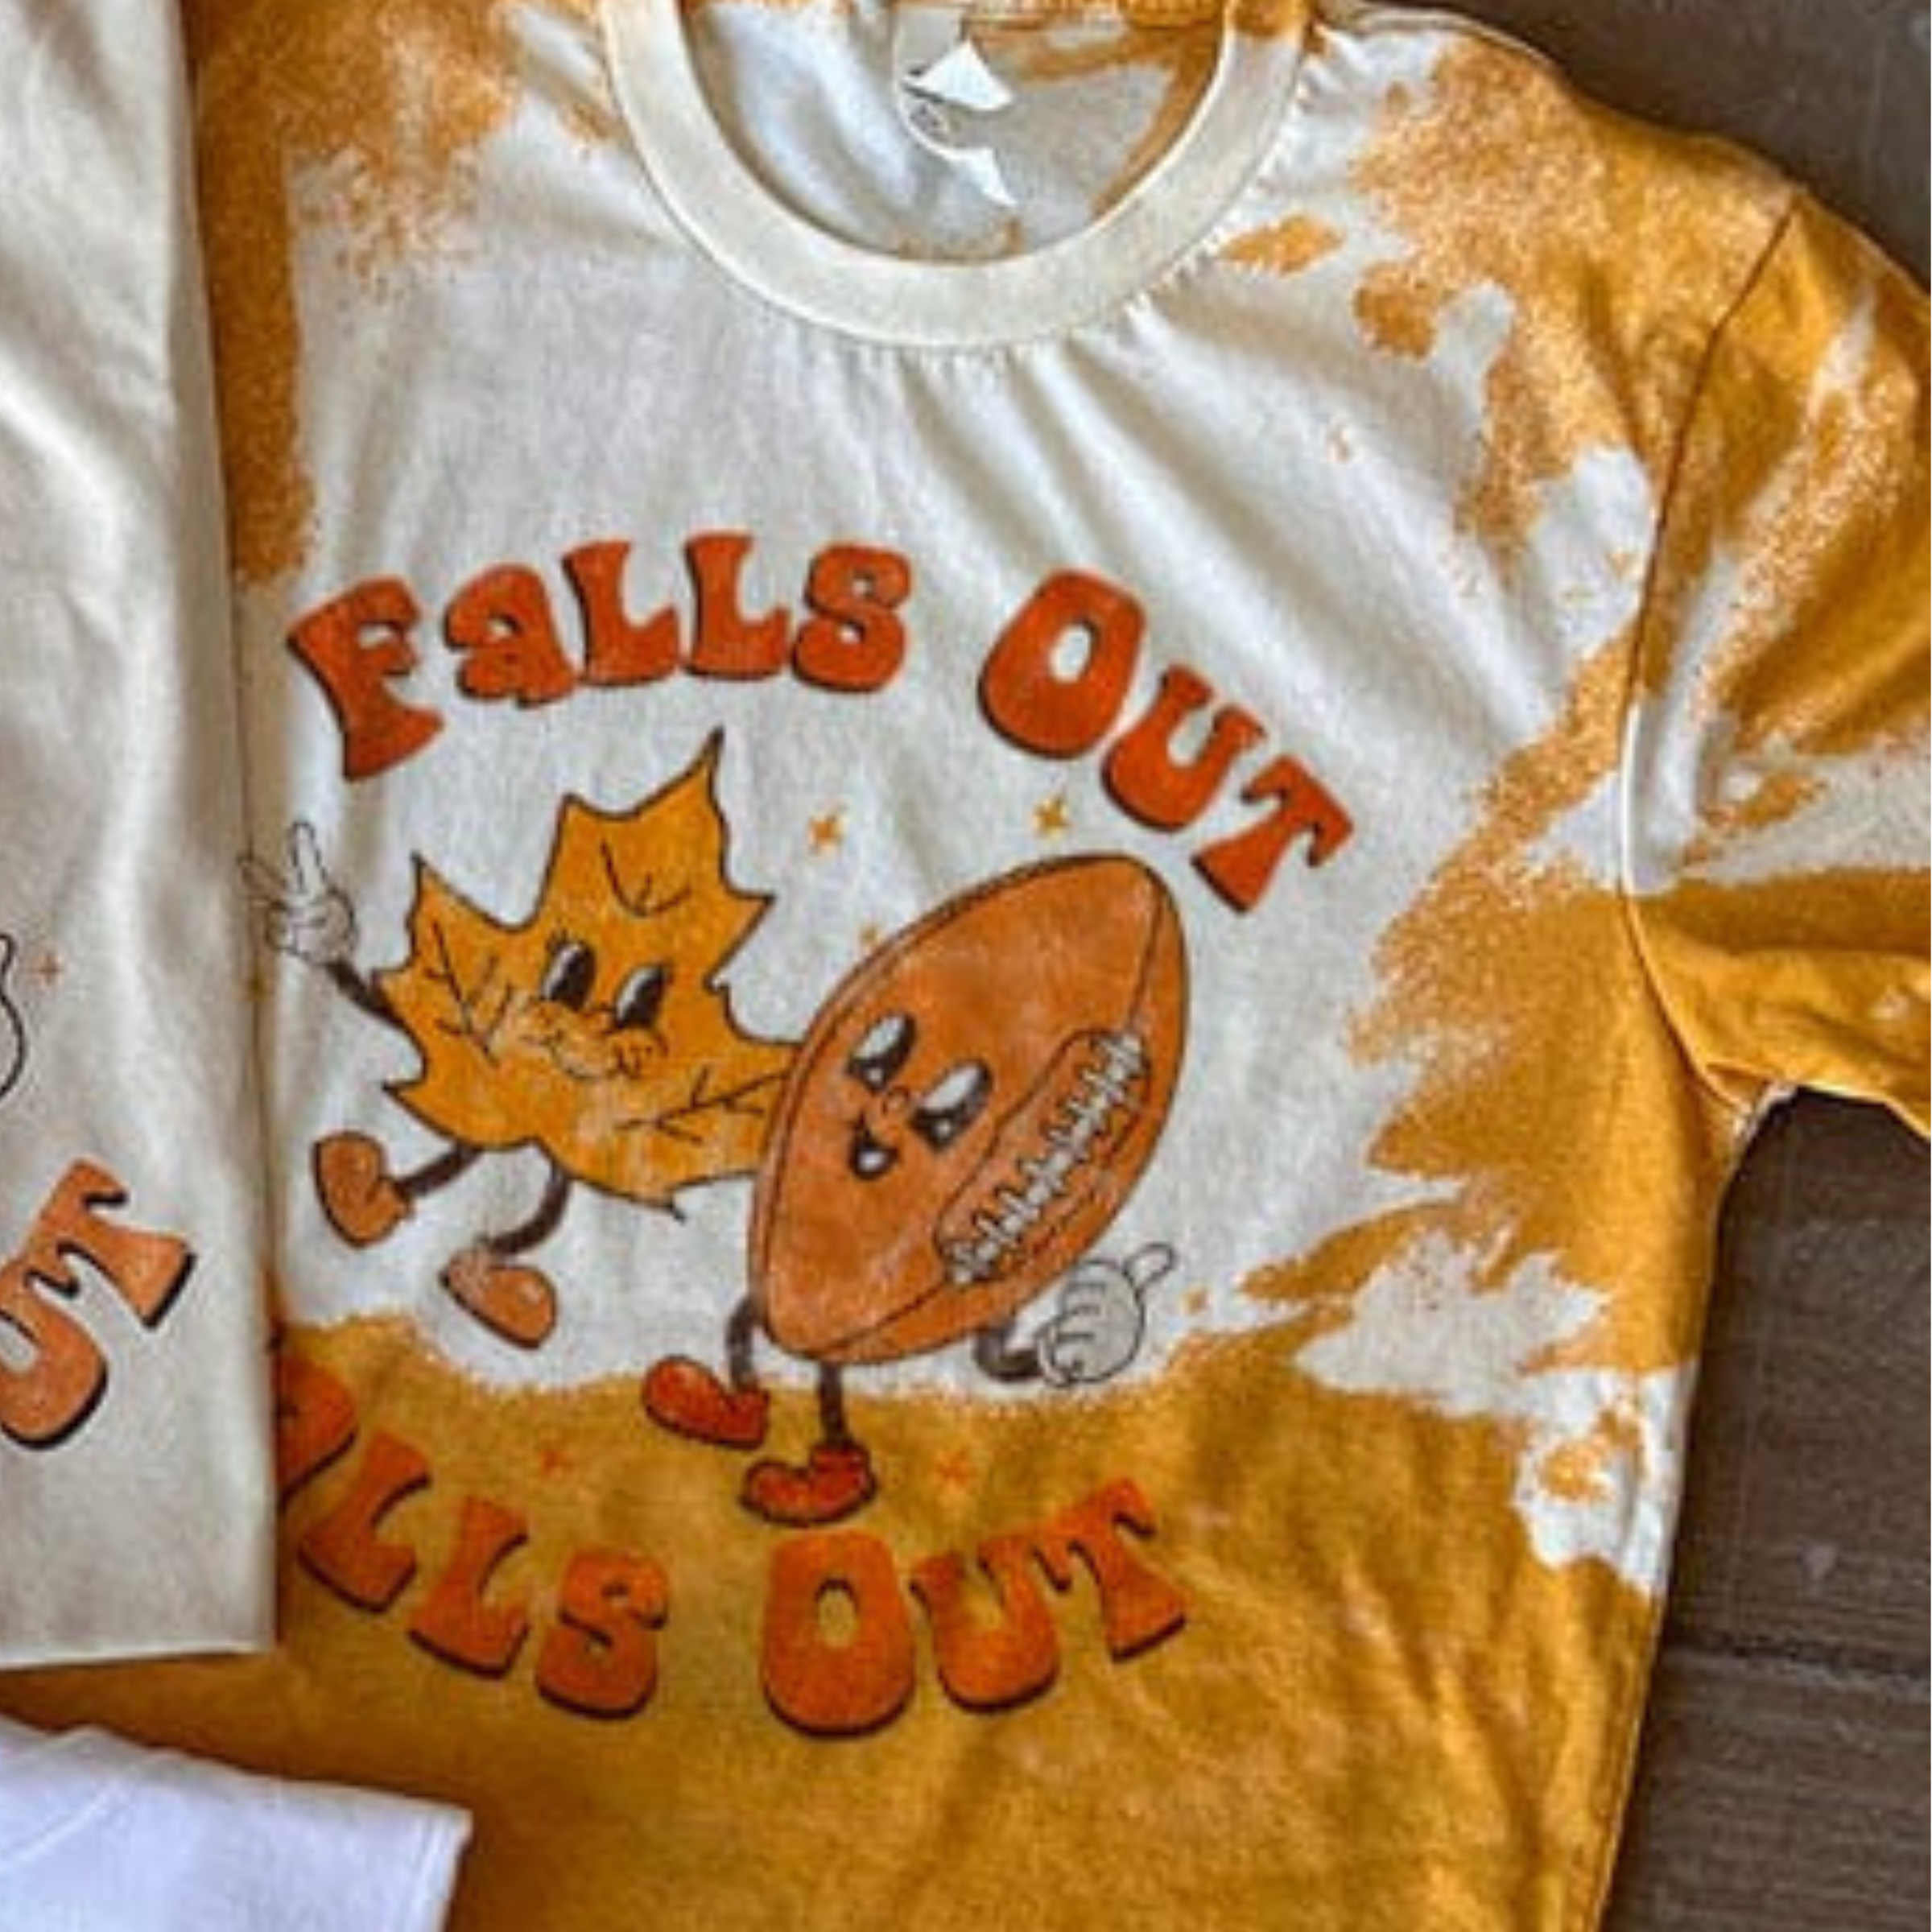 Online Exclusive | Falls Out Balls Out Short Sleeve Bleached Graphic Tee in Mustard Yellow - Giddy Up Glamour Boutique